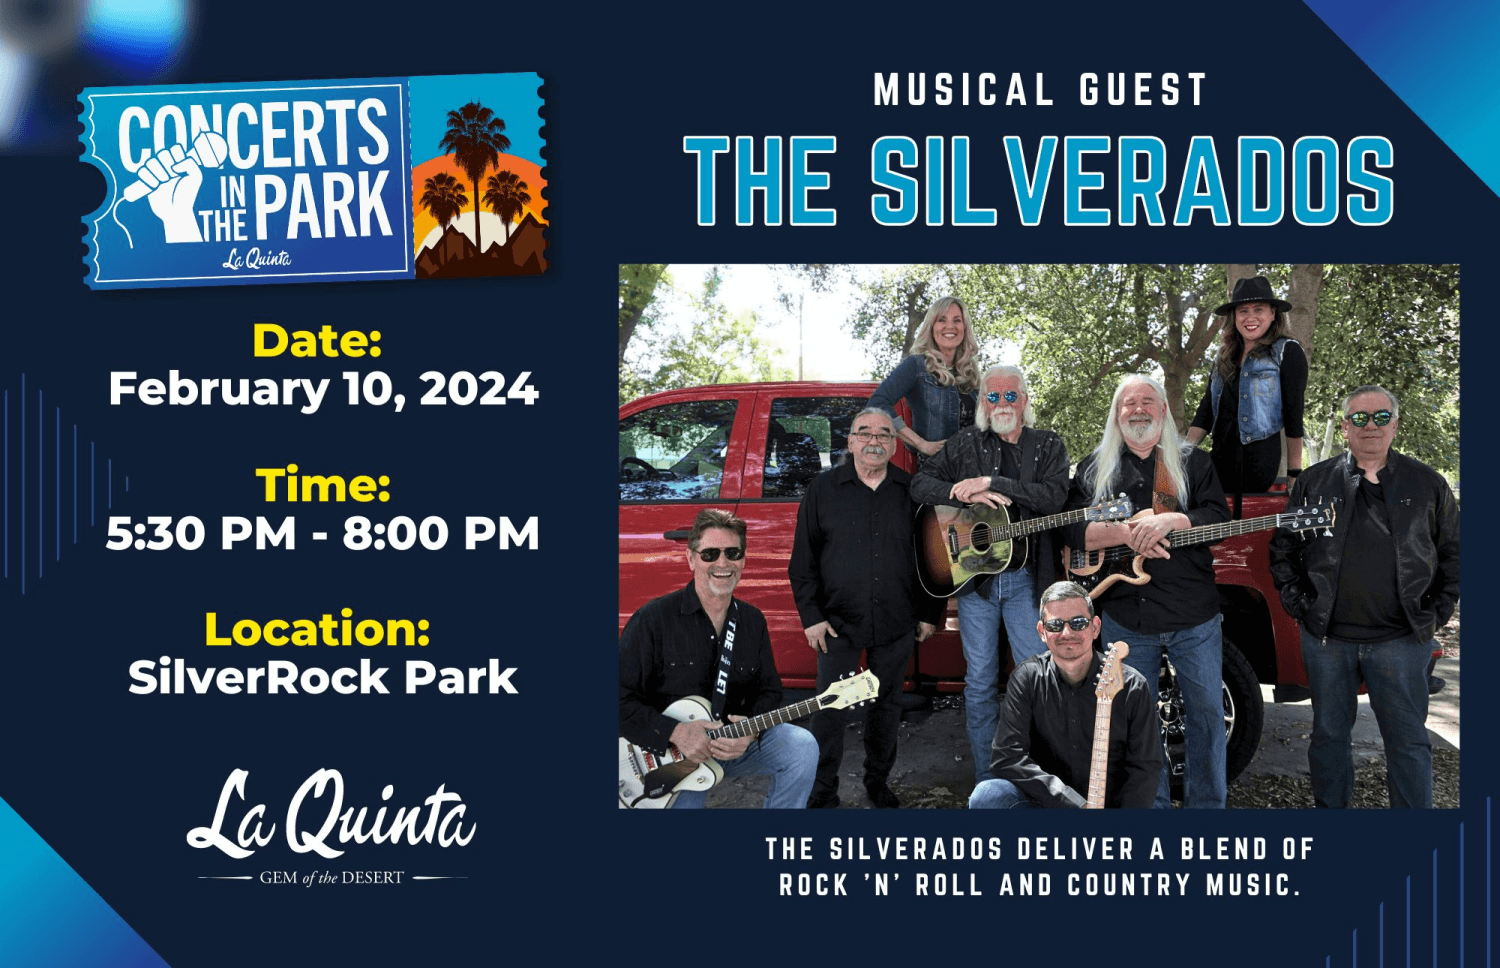 Concerts in the Park!